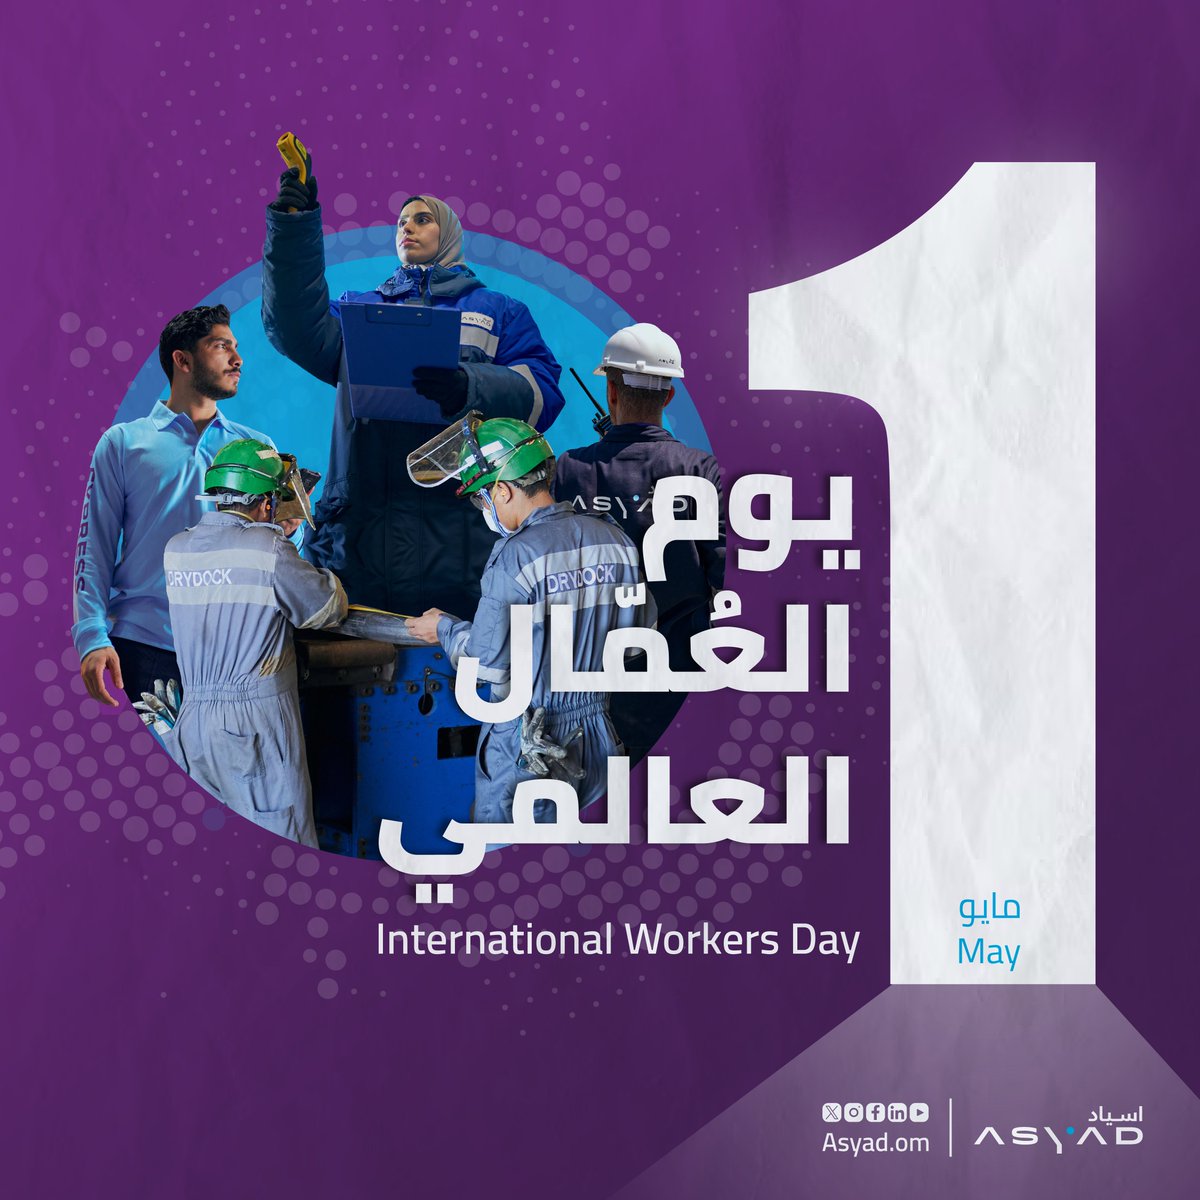 With the efforts and dedication of our employees across all business units of the #ASYADGroup, we innovate and develop our logistics solutions to enhance Oman's position as a global logistics hub and a gateway to investment opportunities. #InternationalWorkersDay